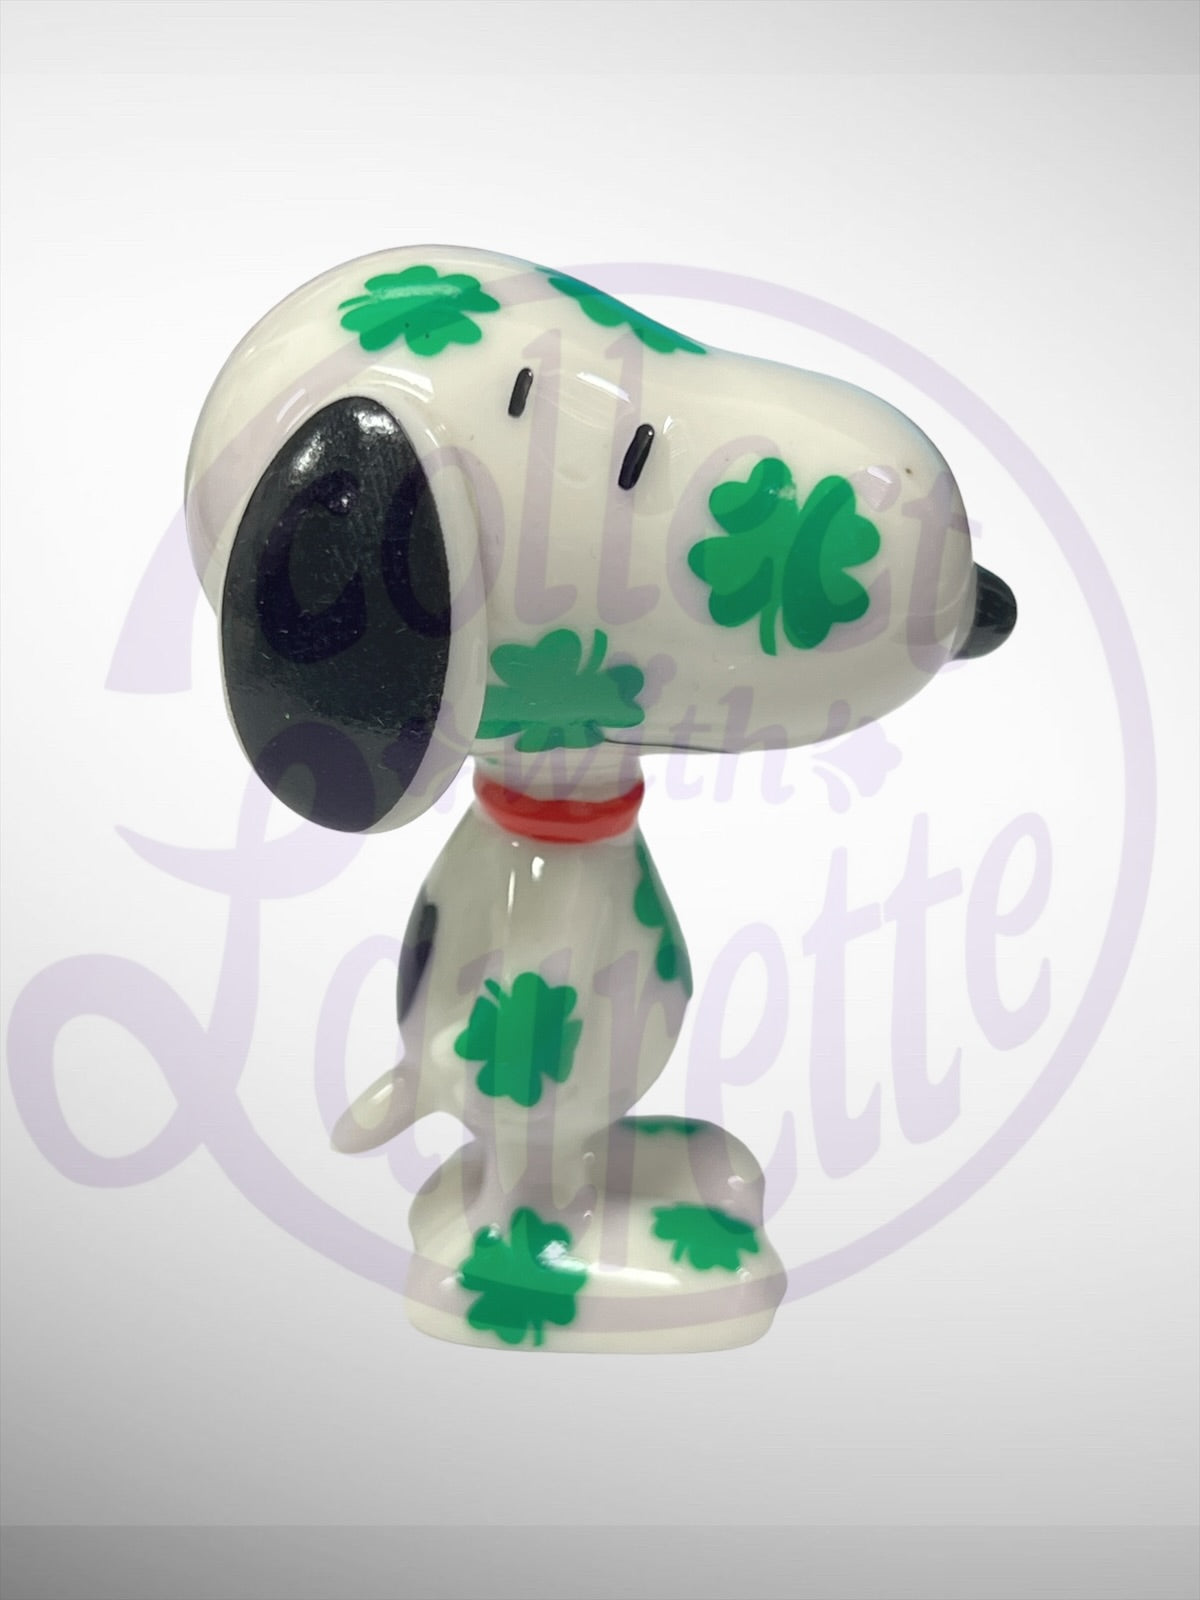 Department 56 Snoopy by Design D56 - Lucky Dog Shamrock Peanuts Figurine (No Box)